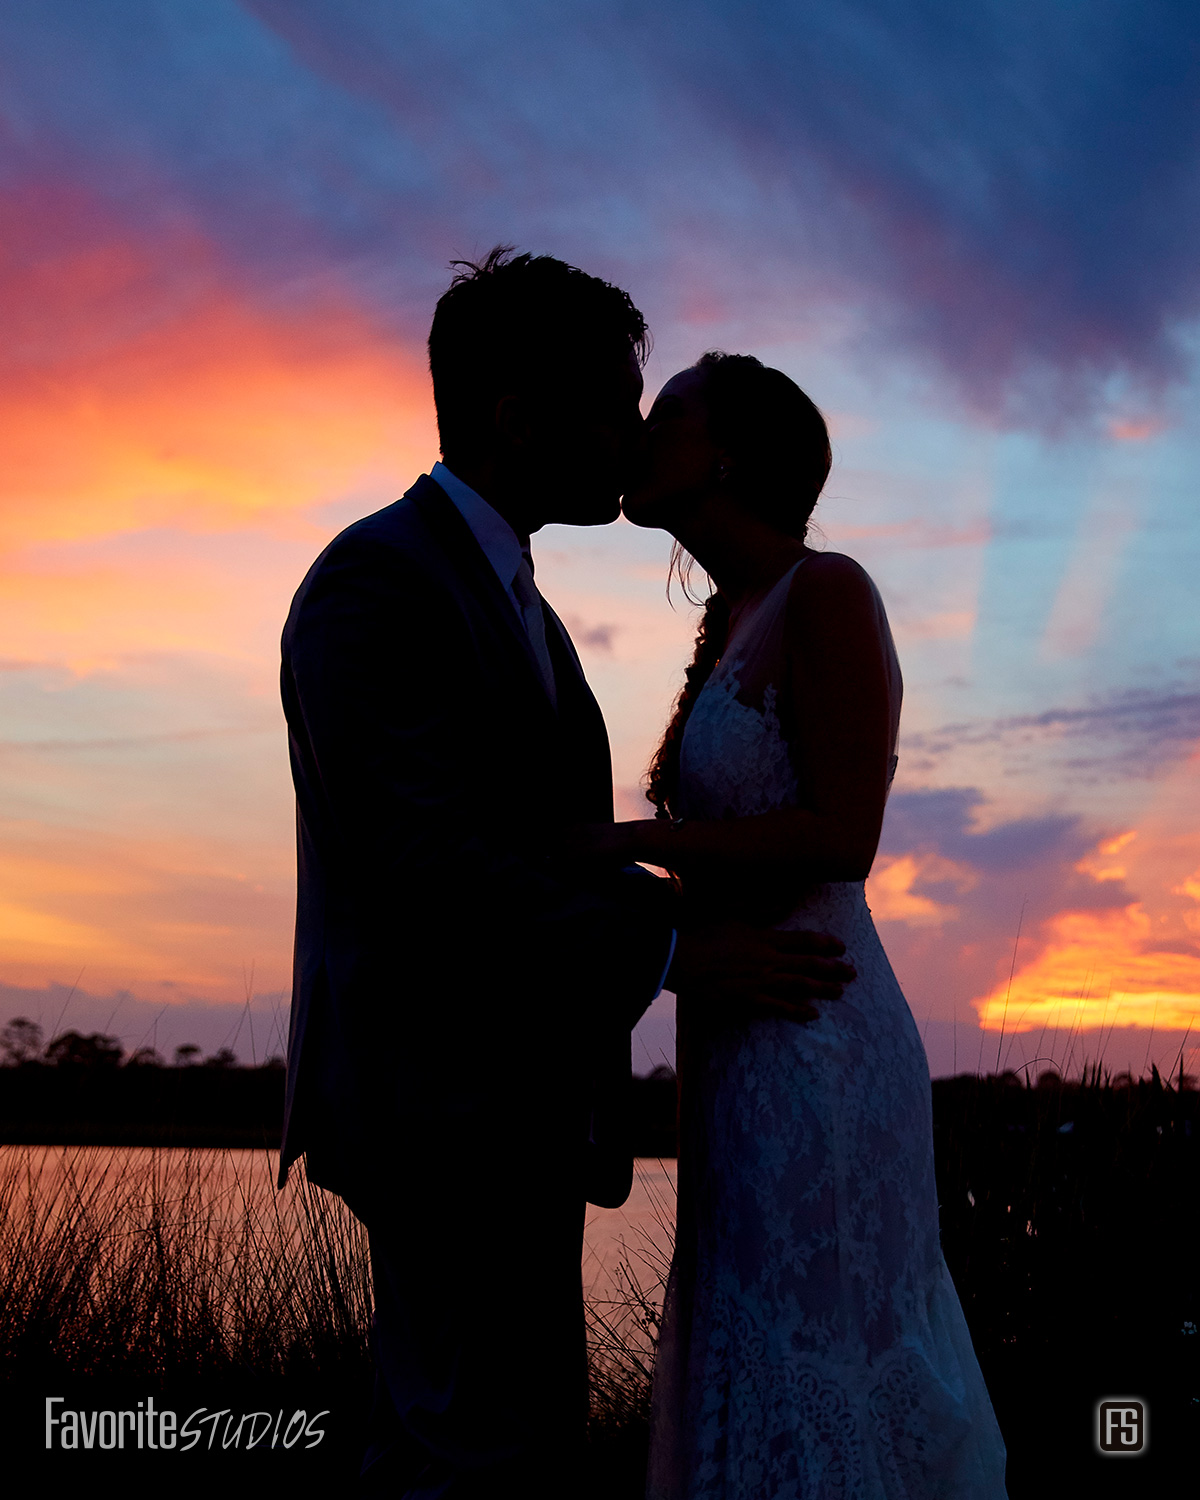 Sunset Silhouette of Couple